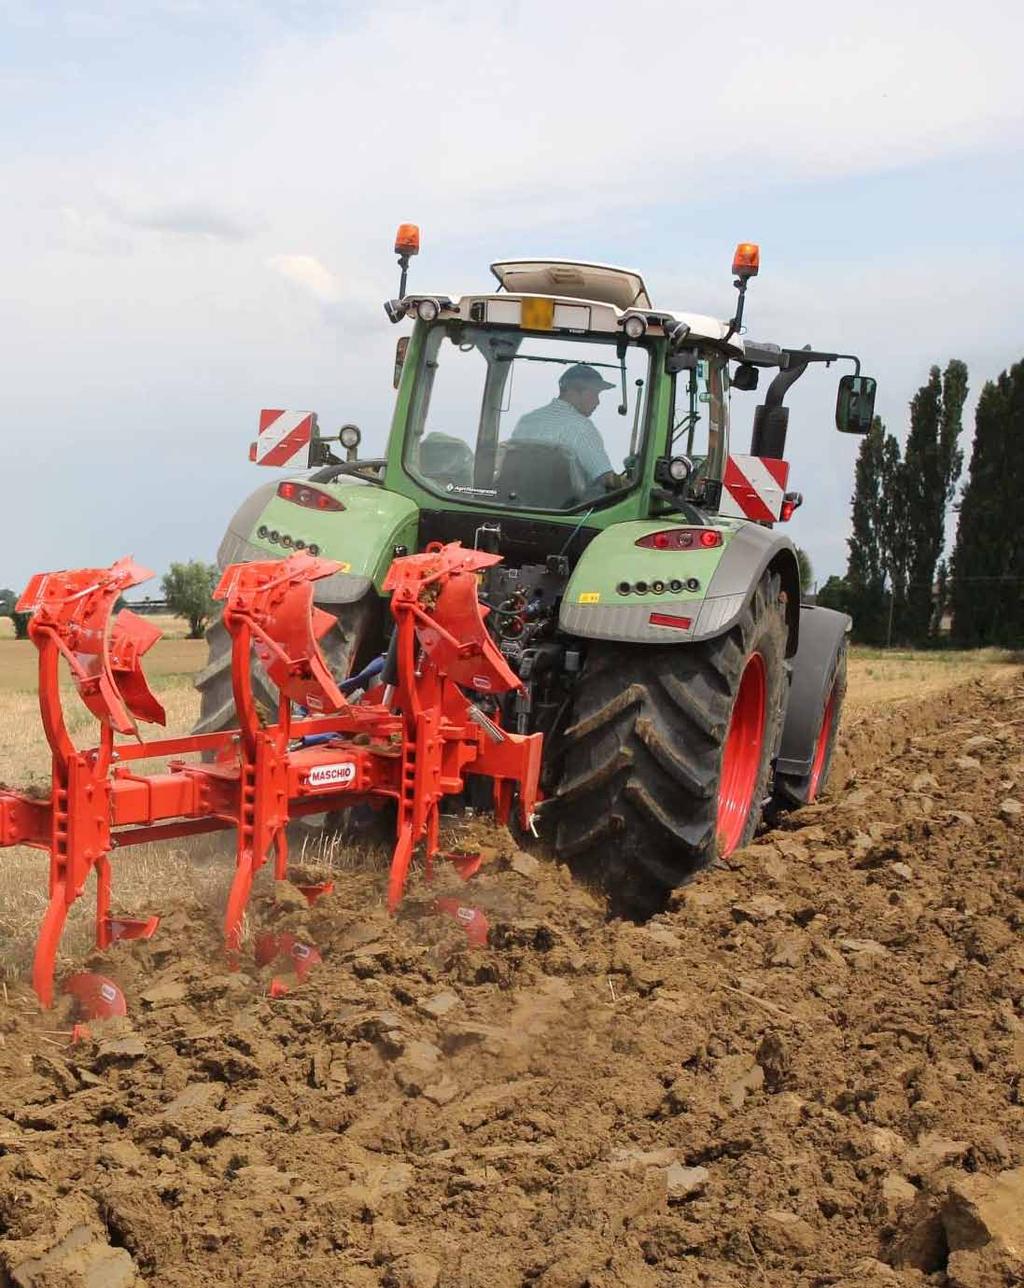 SIRO and SIRO VARIO SIRO and SIRO VARIO models are compact, light and sturdy, optimal for shallow ploughings with moderated tractor HP (70-230 HP).